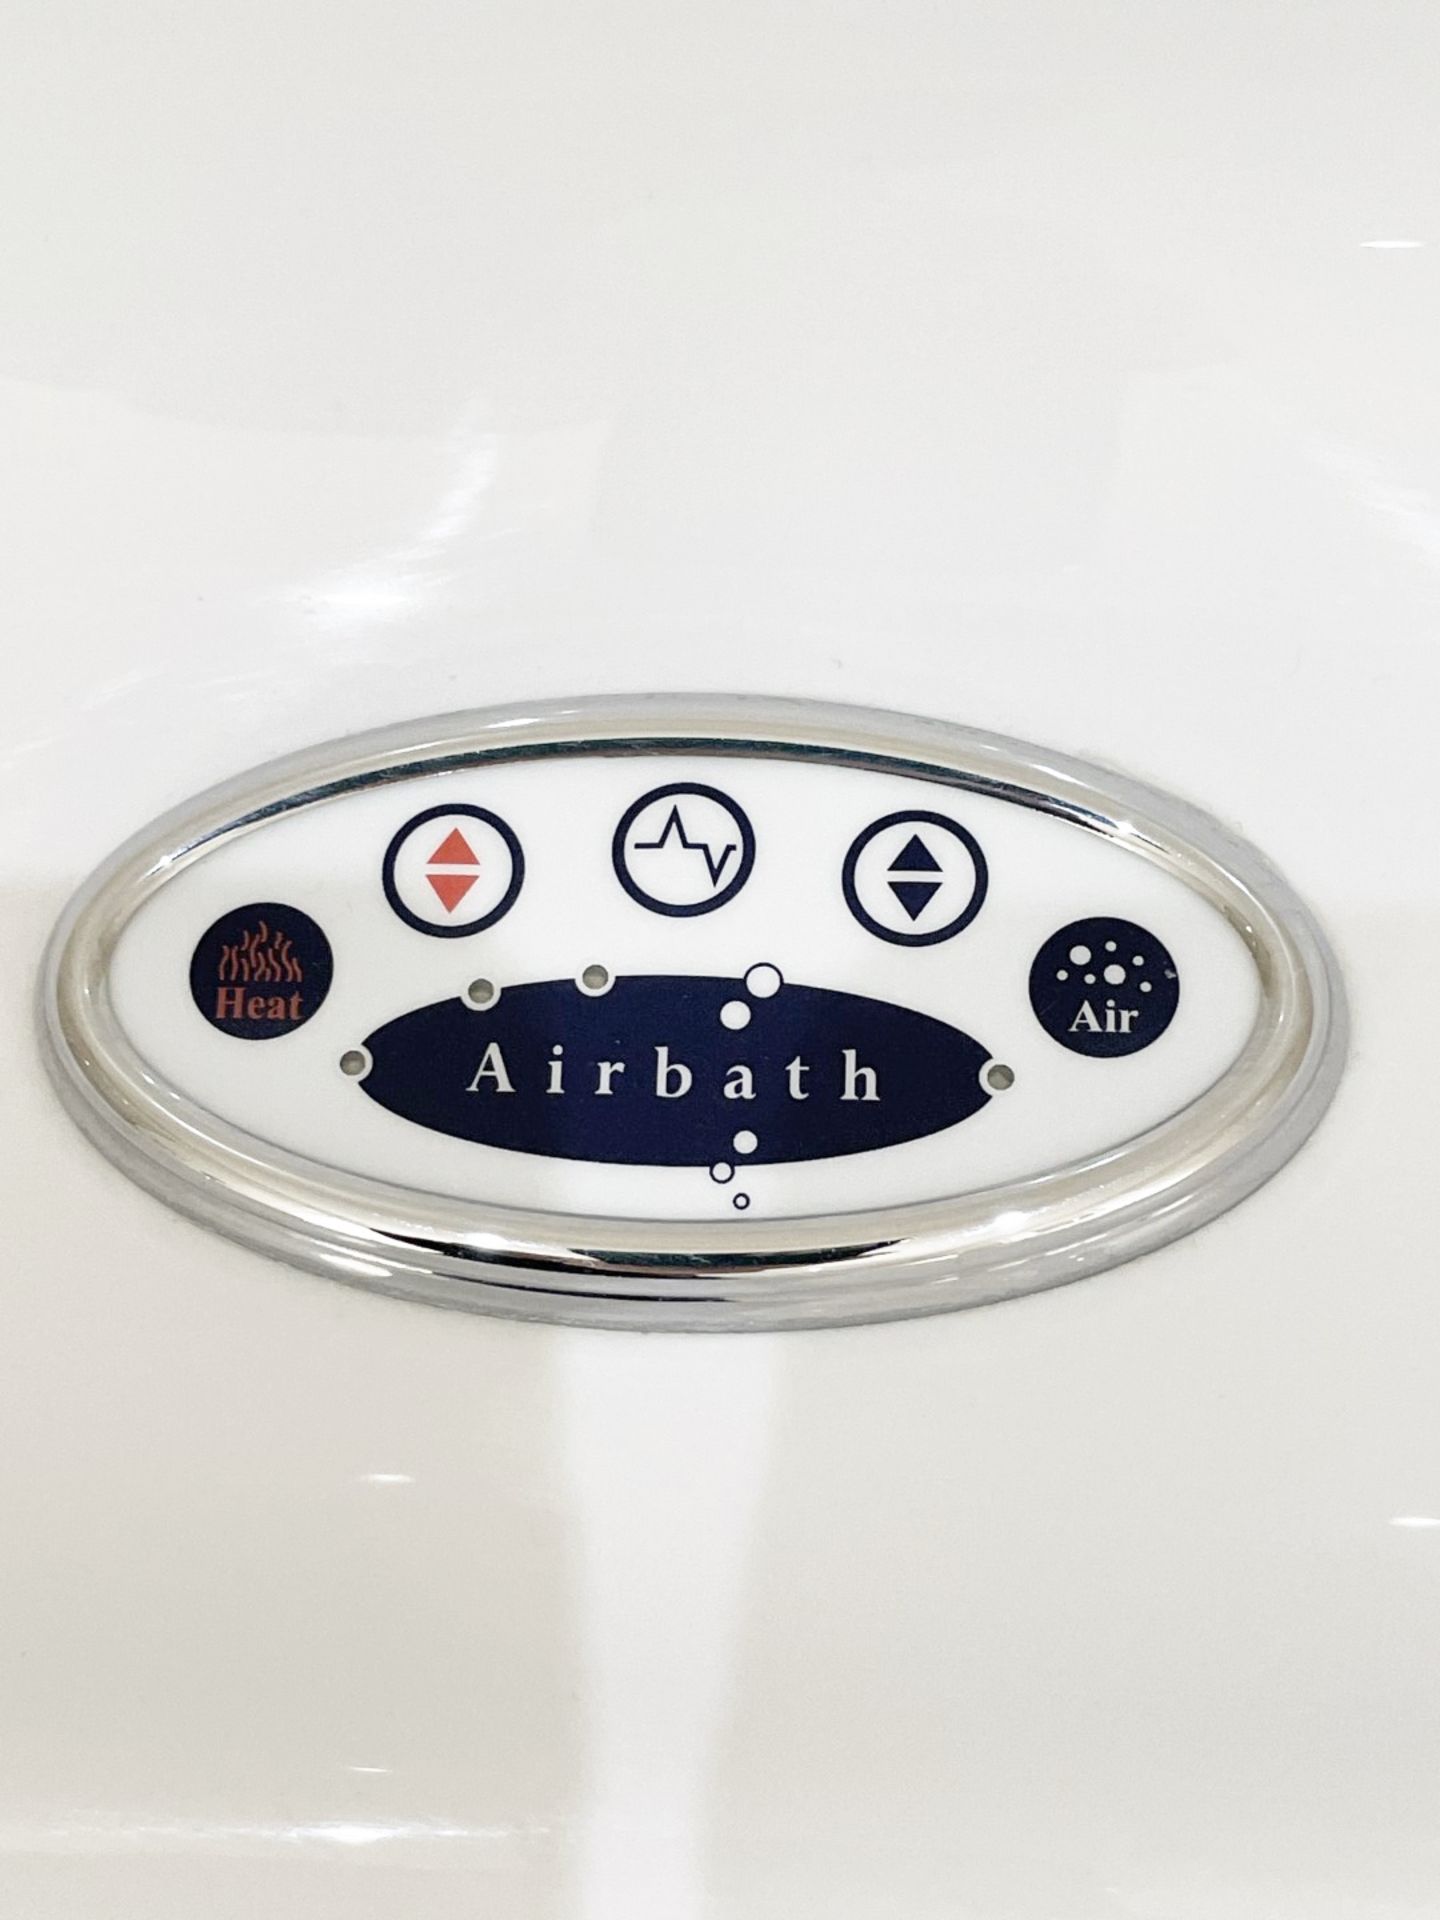 1 x AIRBATH Large Jacuzzi Spa Bath, with Axor Thermostat  - Ref: PAN230 Bed1/bth - CL896 - NO VAT - Image 3 of 20